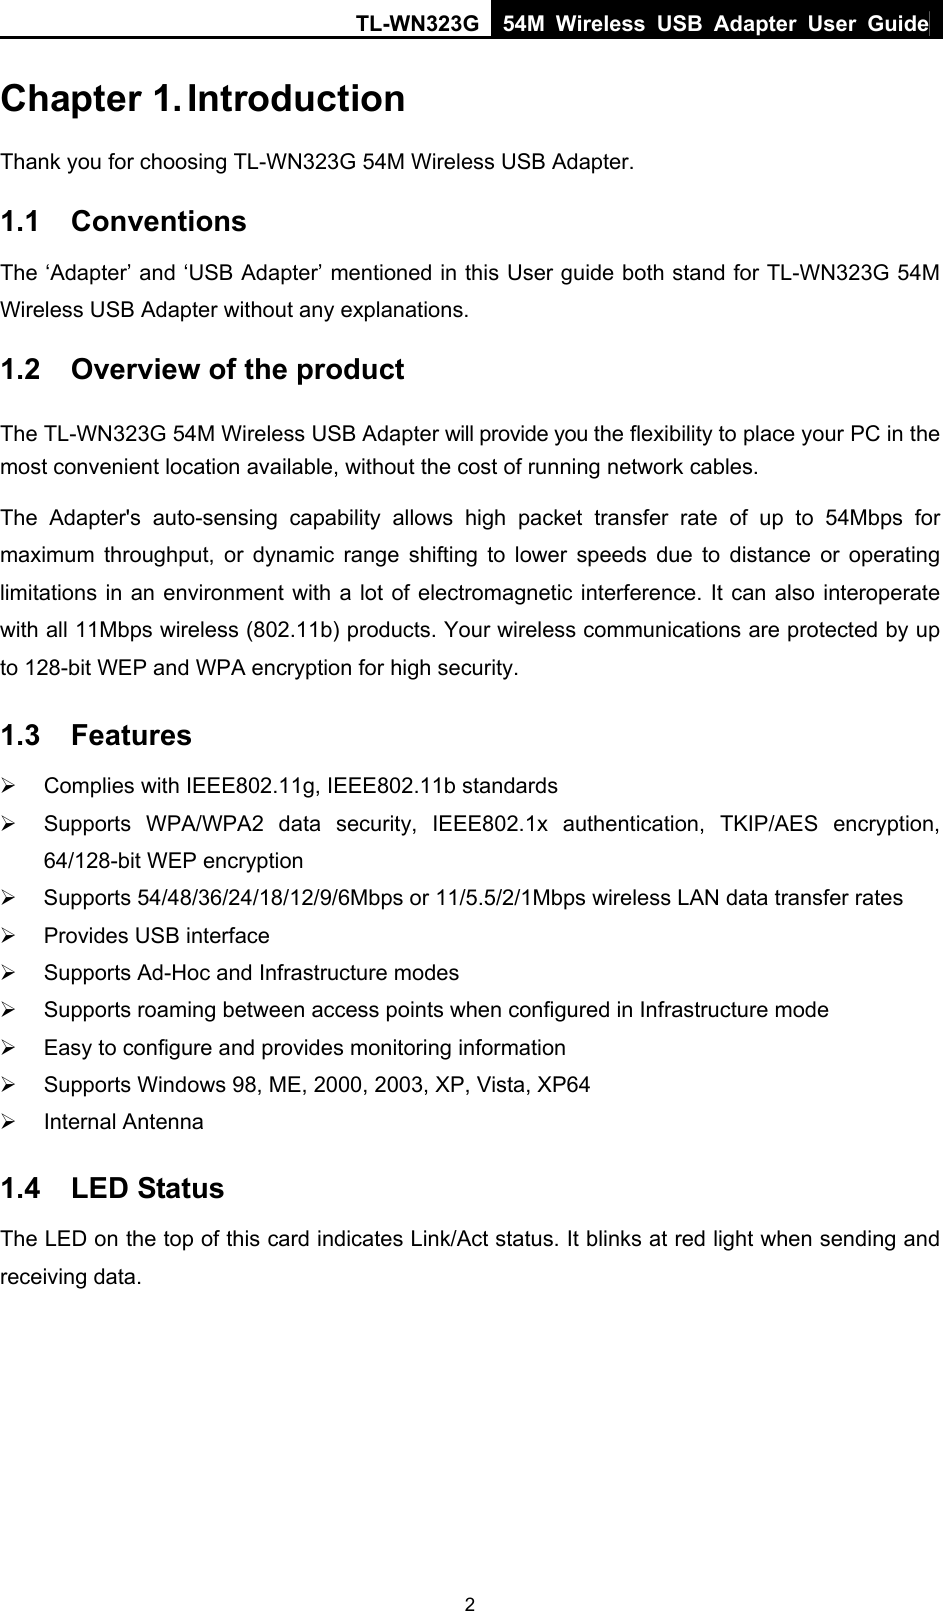 TL-WN323G 54M Wireless USB Adapter User Guide   2Chapter 1. Introduction Thank you for choosing TL-WN323G 54M Wireless USB Adapter.   1.1  Conventions The ‘Adapter’ and ‘USB Adapter’ mentioned in this User guide both stand for TL-WN323G 54M Wireless USB Adapter without any explanations. 1.2  Overview of the product The TL-WN323G 54M Wireless USB Adapter will provide you the flexibility to place your PC in the most convenient location available, without the cost of running network cables. The Adapter&apos;s auto-sensing capability allows high packet transfer rate of up to 54Mbps for maximum throughput, or dynamic range shifting to lower speeds due to distance or operating limitations in an environment with a lot of electromagnetic interference. It can also interoperate with all 11Mbps wireless (802.11b) products. Your wireless communications are protected by up to 128-bit WEP and WPA encryption for high security. 1.3  Features ¾  Complies with IEEE802.11g, IEEE802.11b standards ¾  Supports WPA/WPA2 data security, IEEE802.1x authentication, TKIP/AES encryption, 64/128-bit WEP encryption ¾ Supports 54/48/36/24/18/12/9/6Mbps or 11/5.5/2/1Mbps wireless LAN data transfer rates ¾  Provides USB interface ¾  Supports Ad-Hoc and Infrastructure modes ¾  Supports roaming between access points when configured in Infrastructure mode ¾  Easy to configure and provides monitoring information ¾  Supports Windows 98, ME, 2000, 2003, XP, Vista, XP64 ¾ Internal Antenna 1.4  LED Status The LED on the top of this card indicates Link/Act status. It blinks at red light when sending and receiving data.  